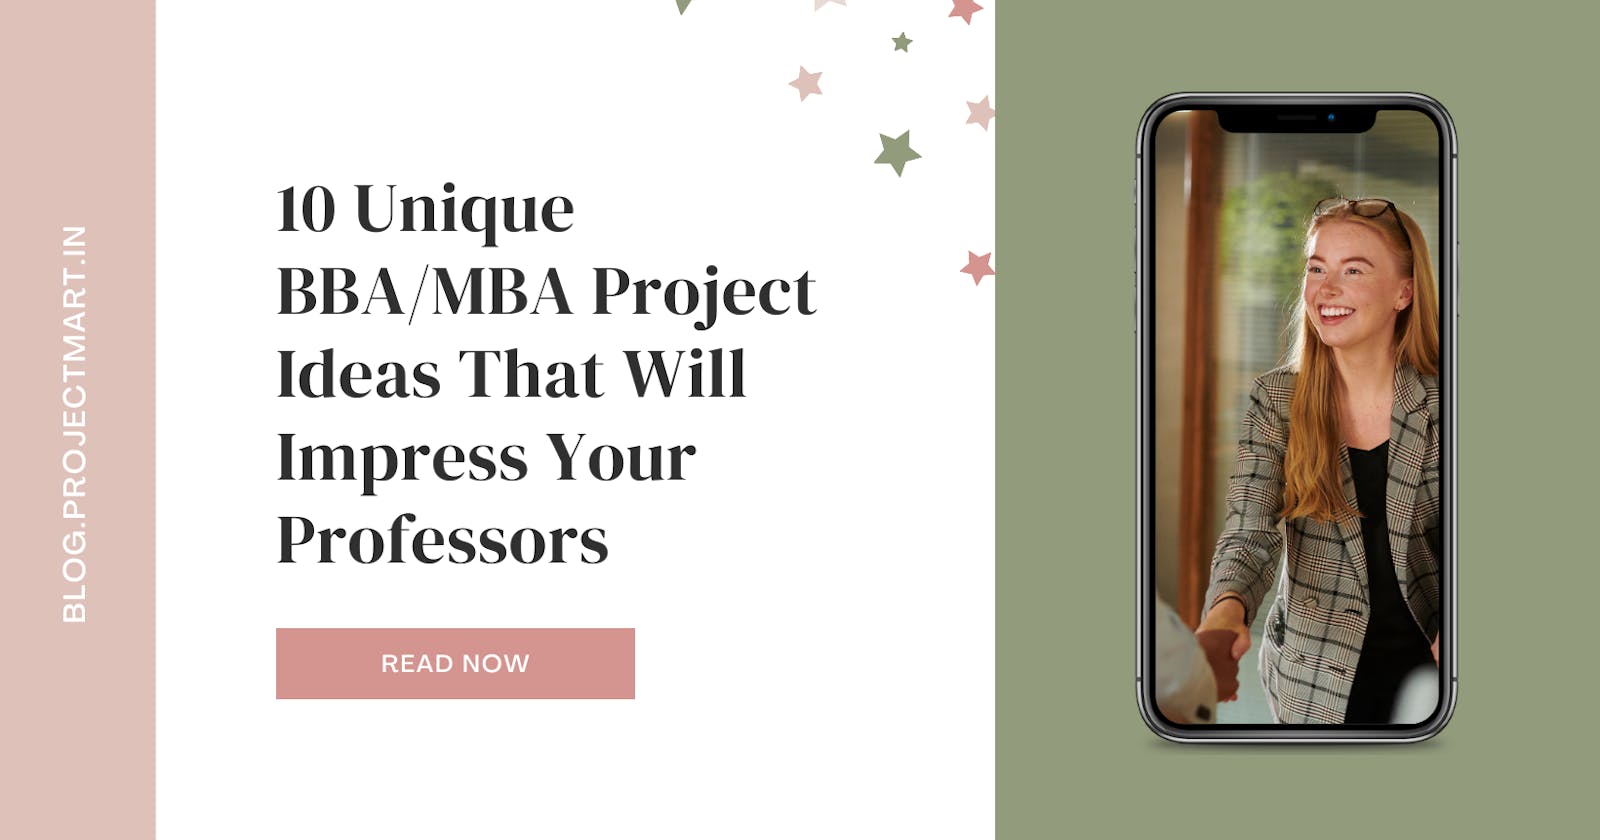 10 Unique BBA/MBA Project Ideas That Will Impress Your Professors